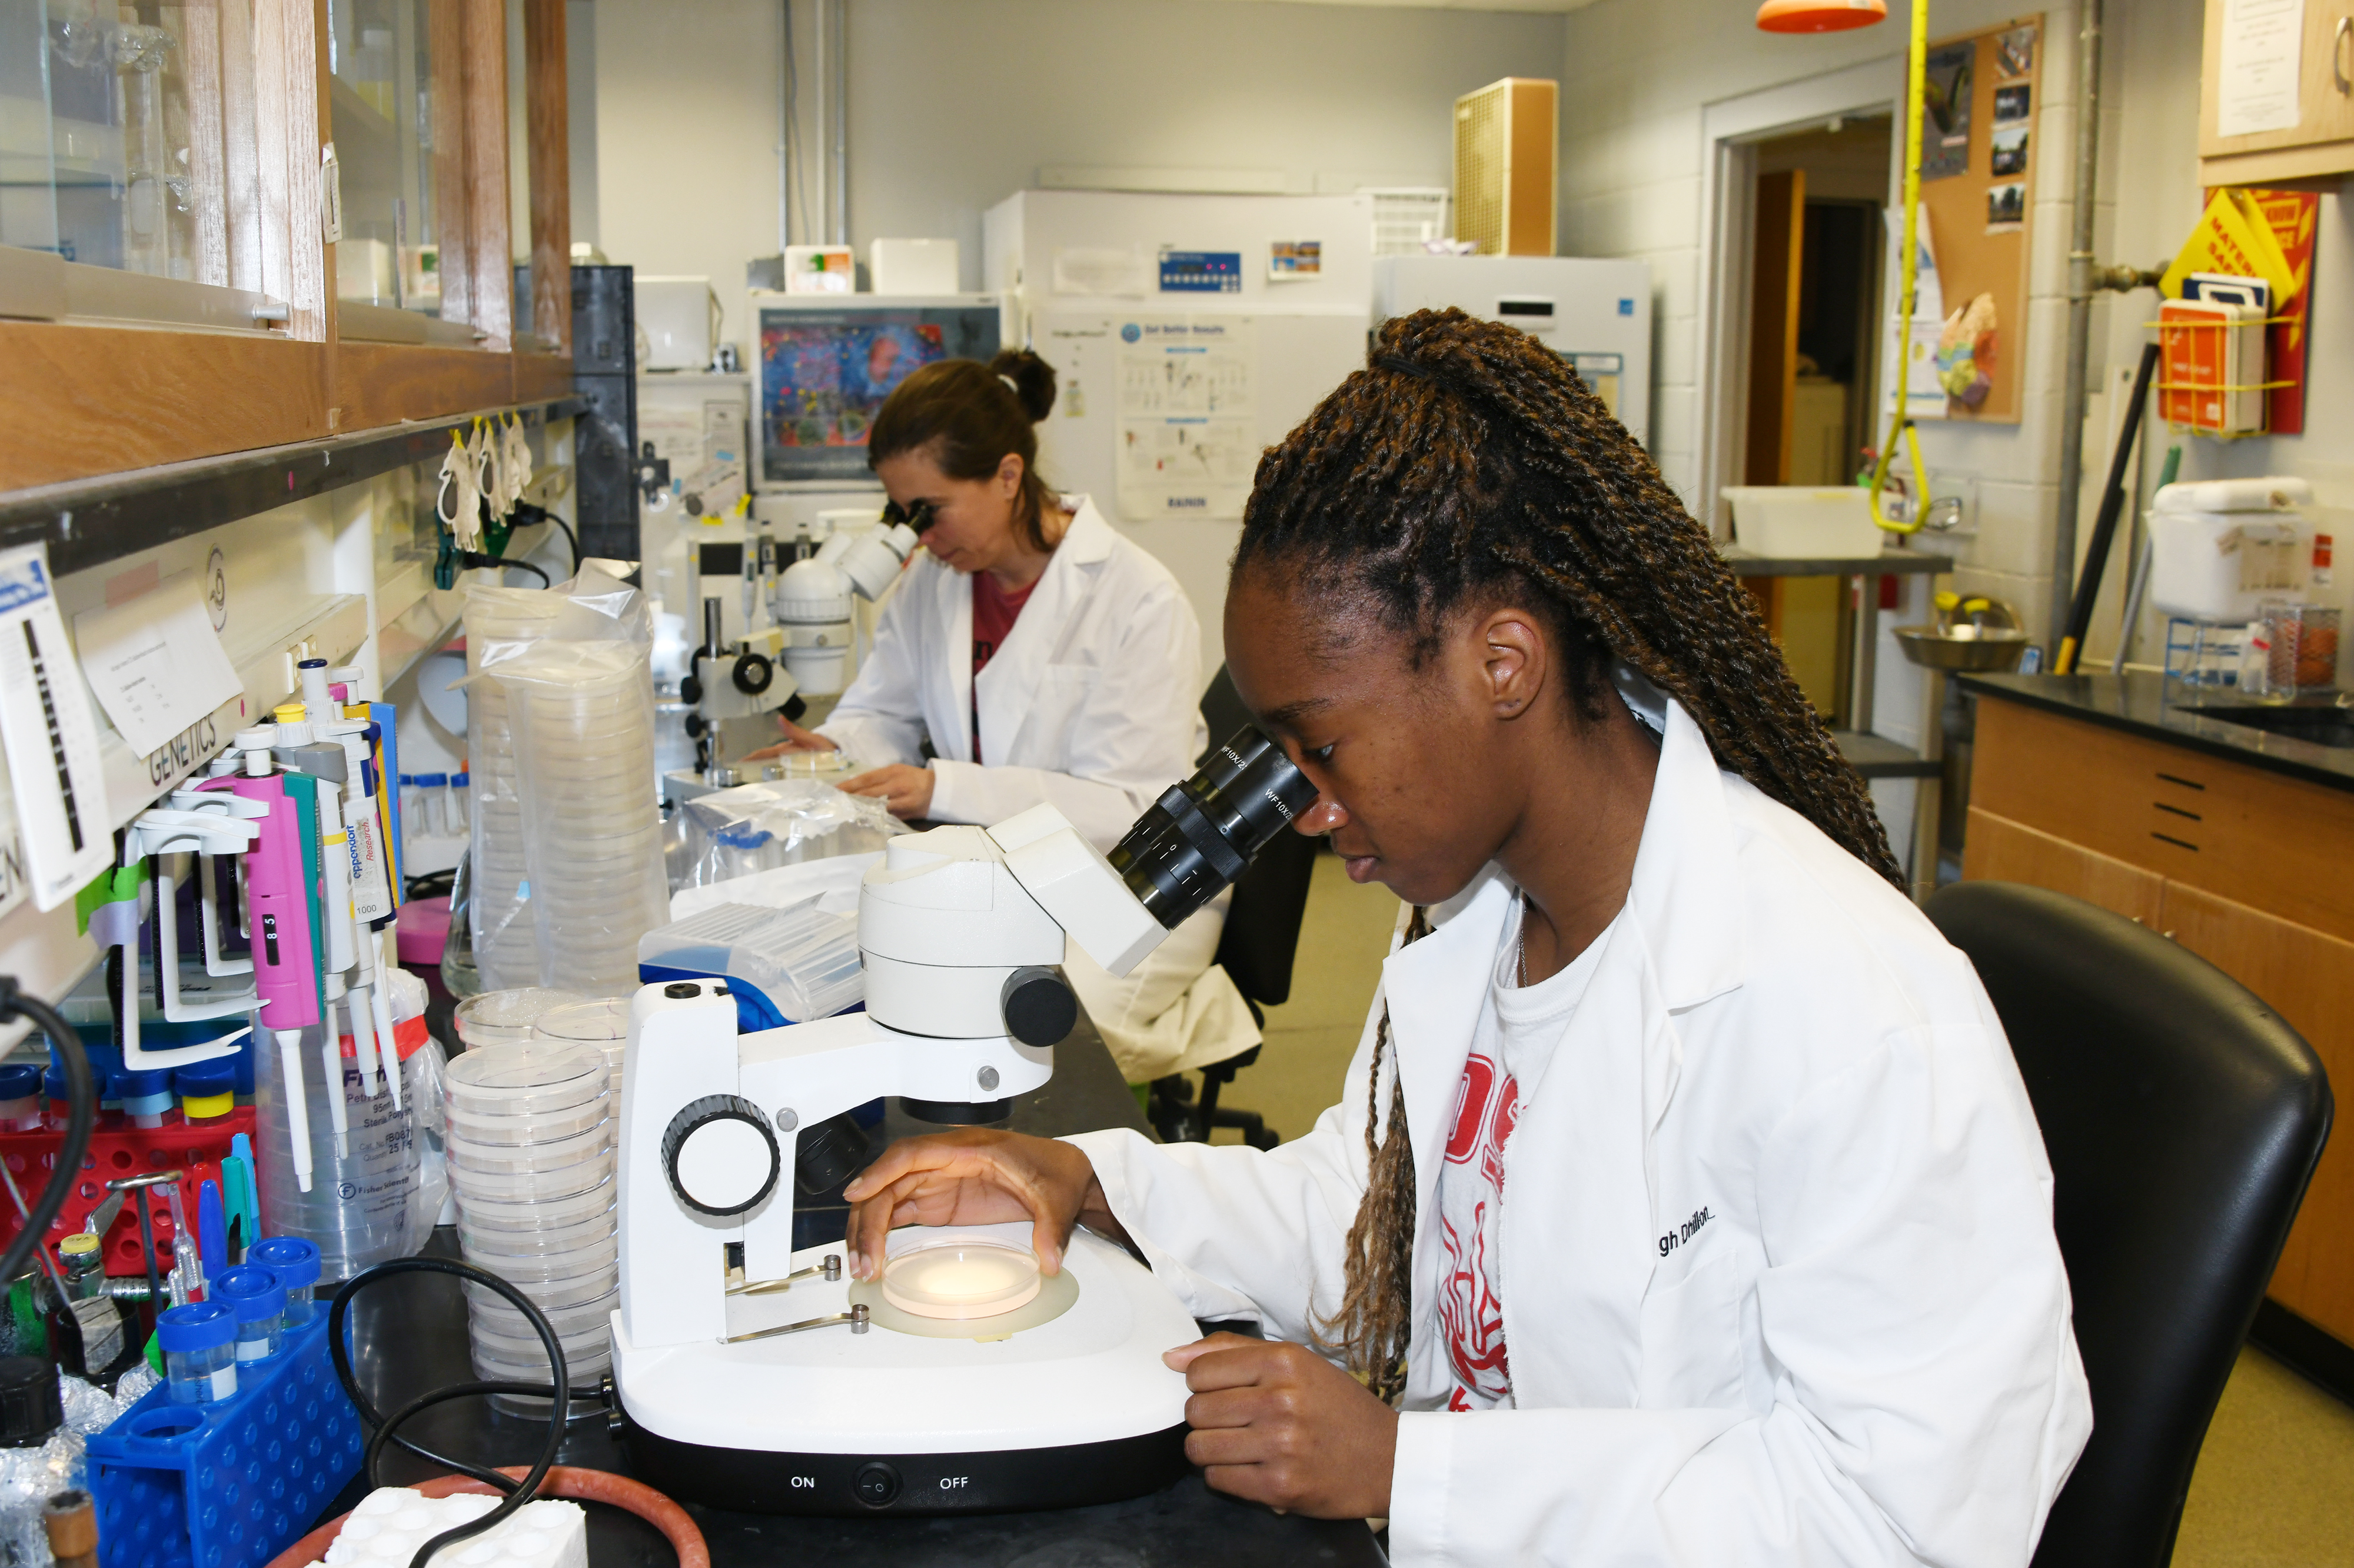 Researchers Sylvia Okafor and Megan Bone are continuing their work in the lab of Dr. Harbinder S. Dhillon, associate professor of biological sciences, despite the ongoing COVID-19 crisis.